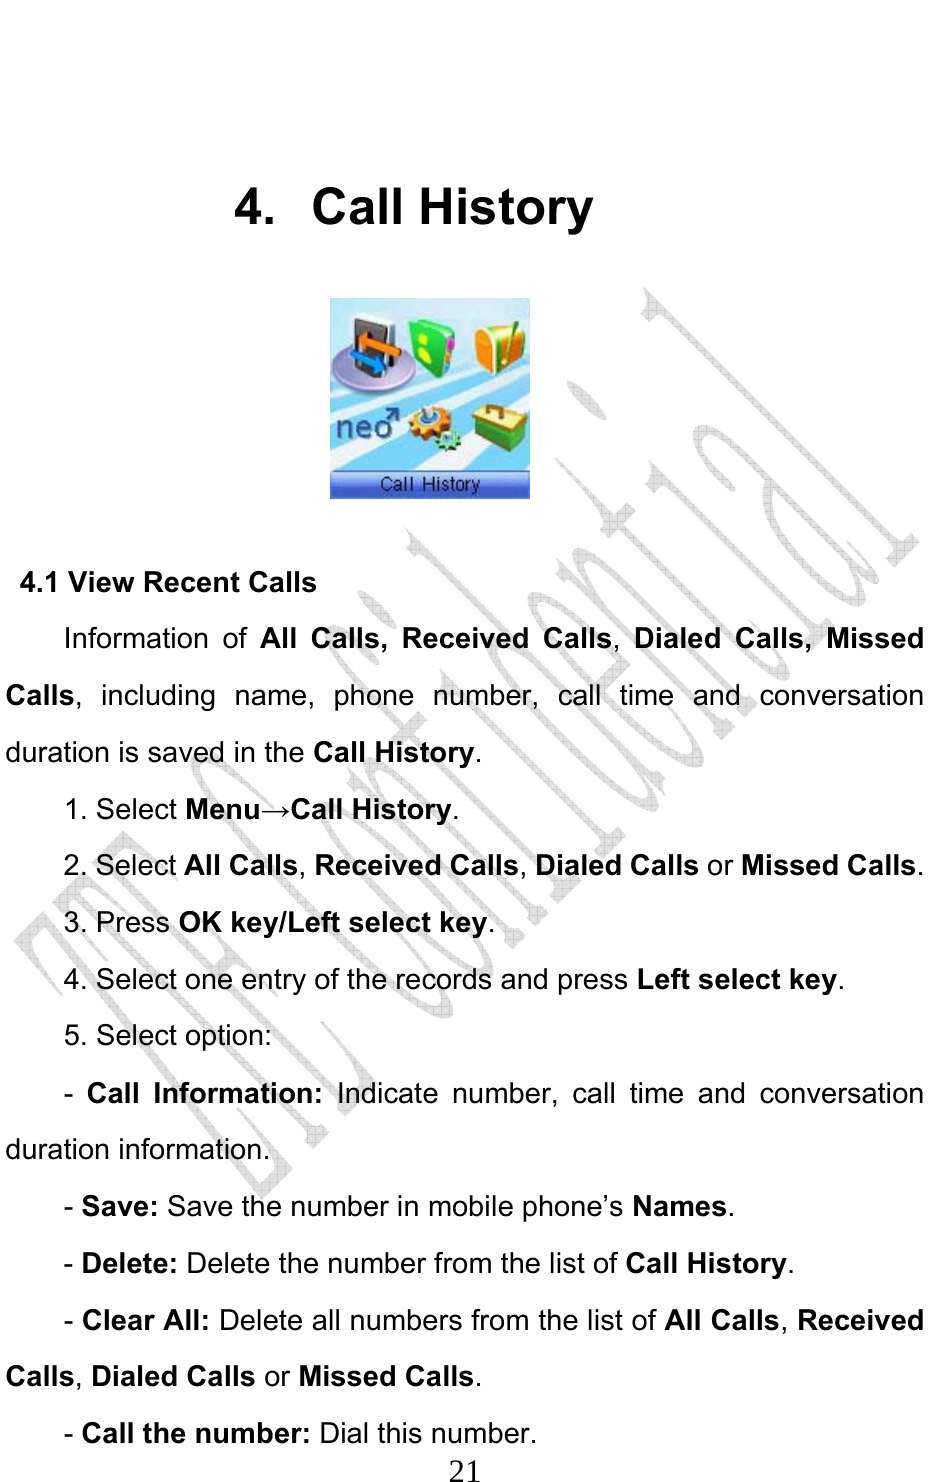                              21 4. Call History                4.1 View Recent Calls Information of All Calls, Received Calls,  Dialed Calls, Missed Calls, including name, phone number, call time and conversation duration is saved in the Call History. 1. Select Menu→Call History. 2. Select All Calls, Received Calls, Dialed Calls or Missed Calls.  3. Press OK key/Left select key. 4. Select one entry of the records and press Left select key. 5. Select option: -  Call Information: Indicate number, call time and conversation duration information.   - Save: Save the number in mobile phone’s Names.  - Delete: Delete the number from the list of Call History. - Clear All: Delete all numbers from the list of All Calls, Received Calls, Dialed Calls or Missed Calls.  - Call the number: Dial this number. 